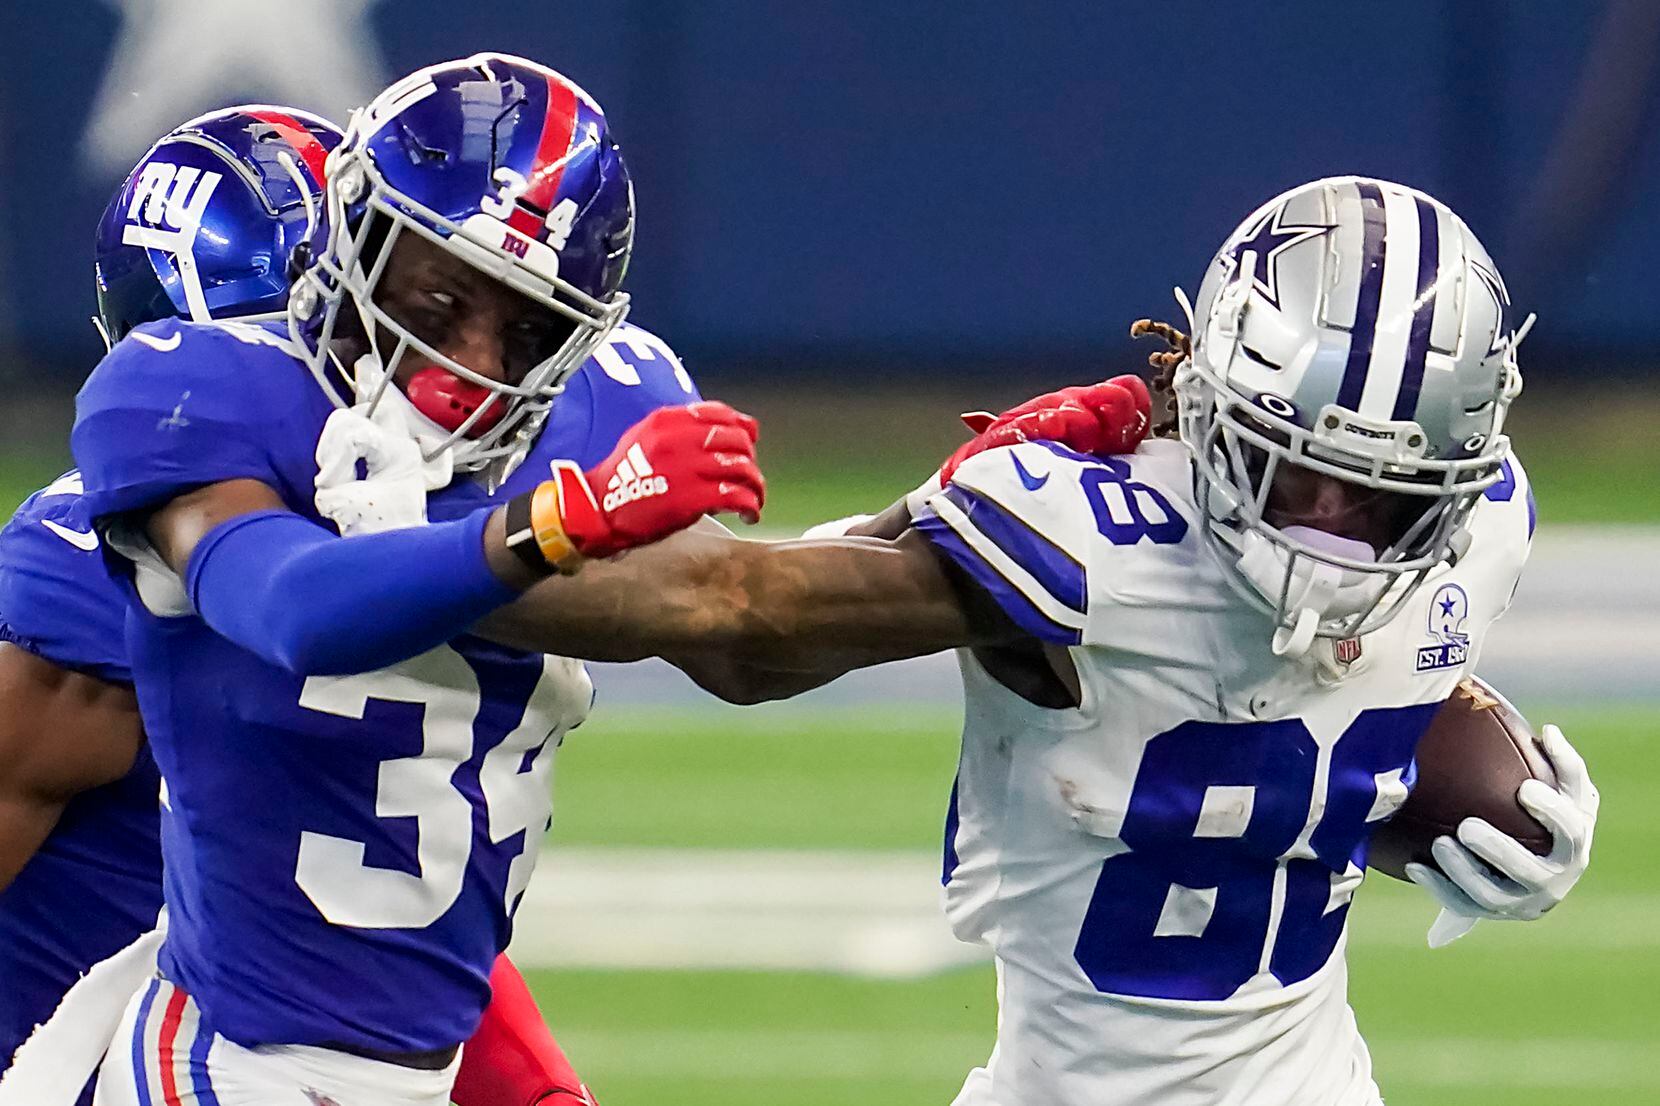 Dallas Cowboys wide receiver CeeDee Lamb (88) pushes past New York Giants safety Adrian Colbert (34) during the second quarter of an NFL football game at AT&T Stadium on Sunday, Oct. 11, 2020, in Arlington. (Smiley N. Pool/The Dallas Morning News)